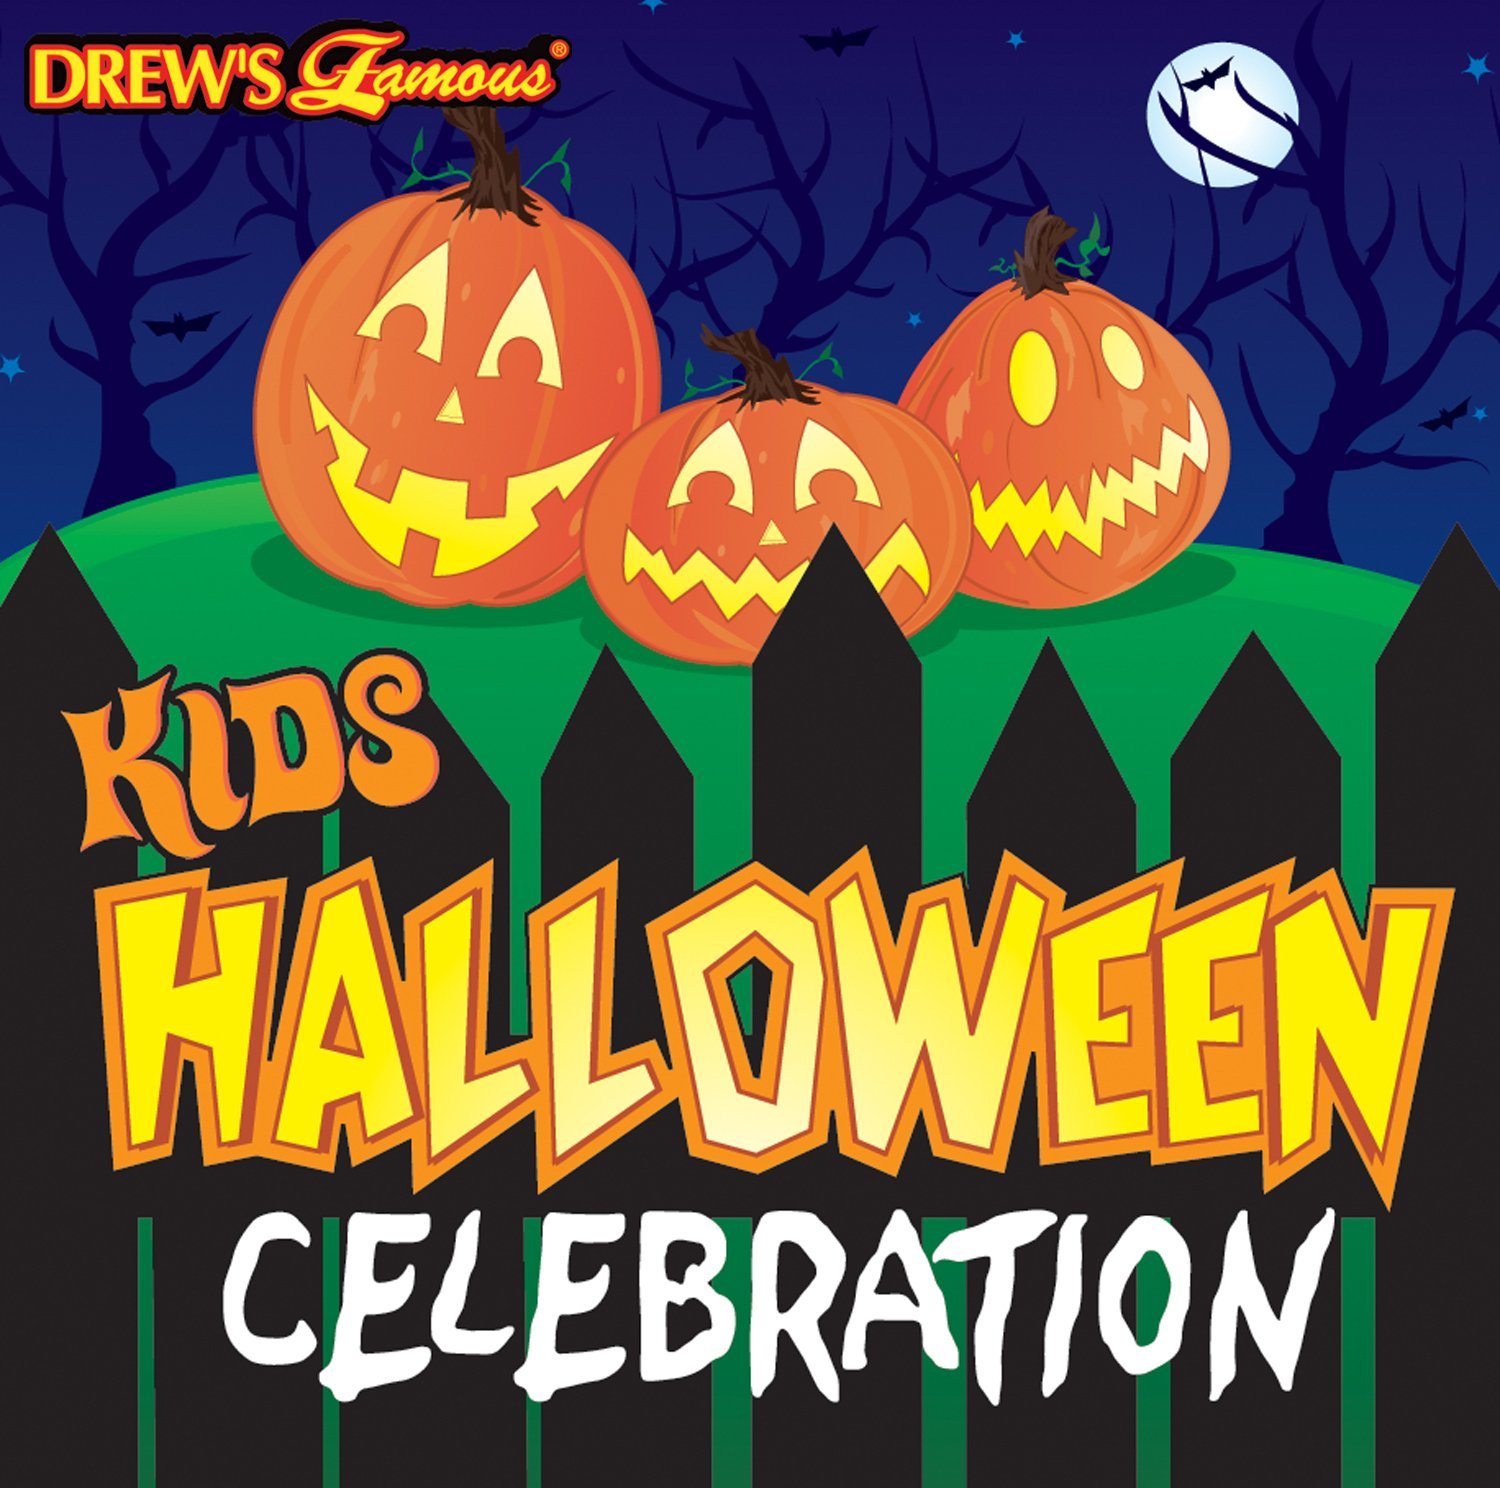 Kids Halloween Celebration Music Songs Sounds And Stories Drew's Famous 